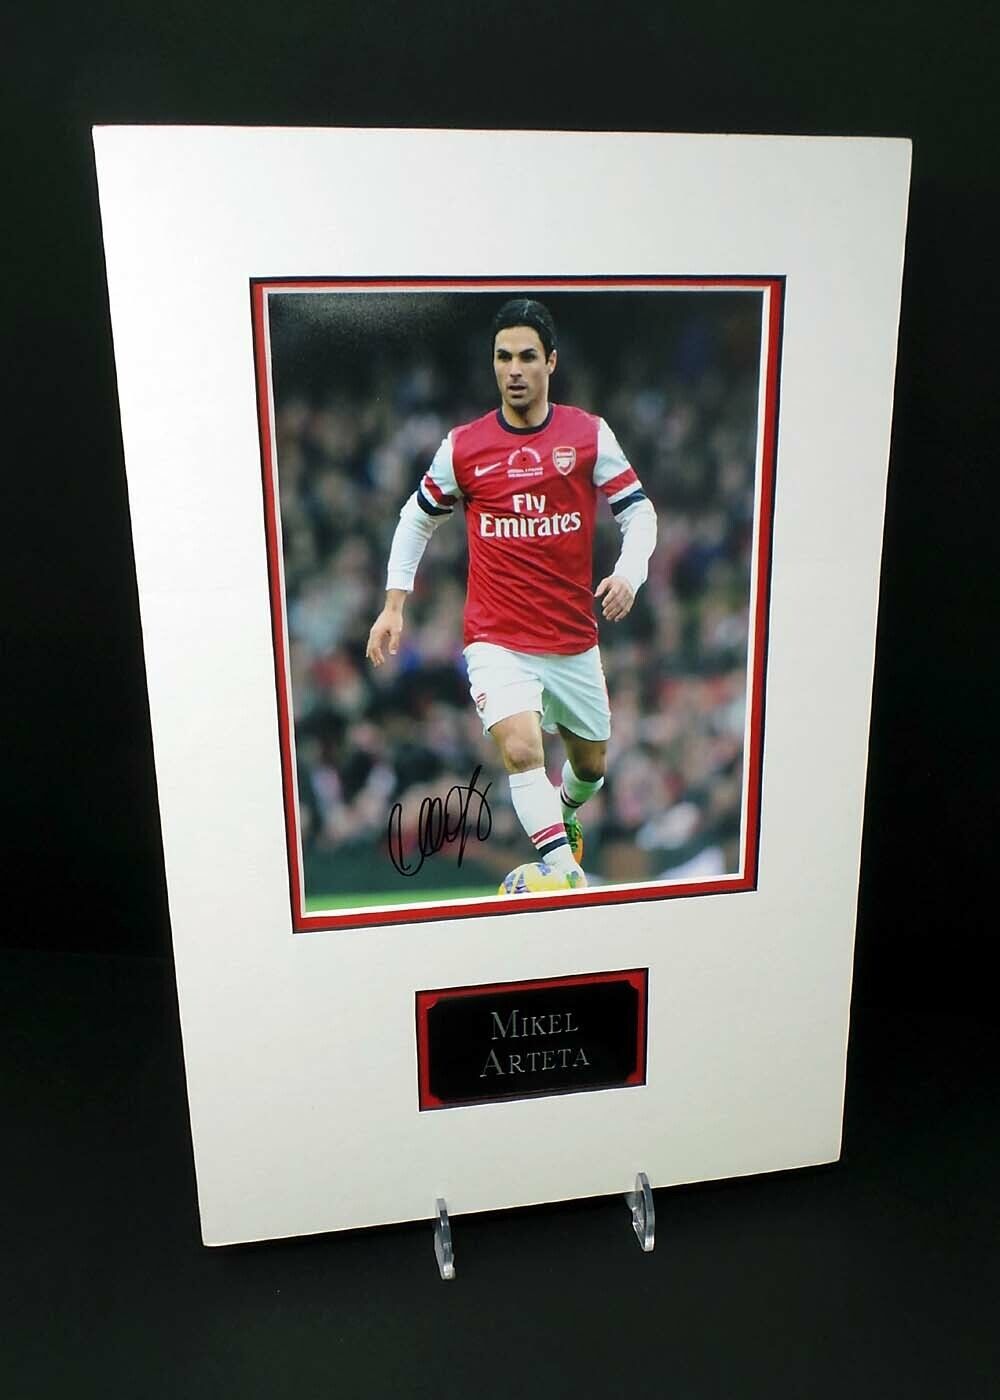 Mikel ARTETA Signed & Mounted 10x8 Arsenal Football Photo Poster painting AFTAL RD COA Gunners